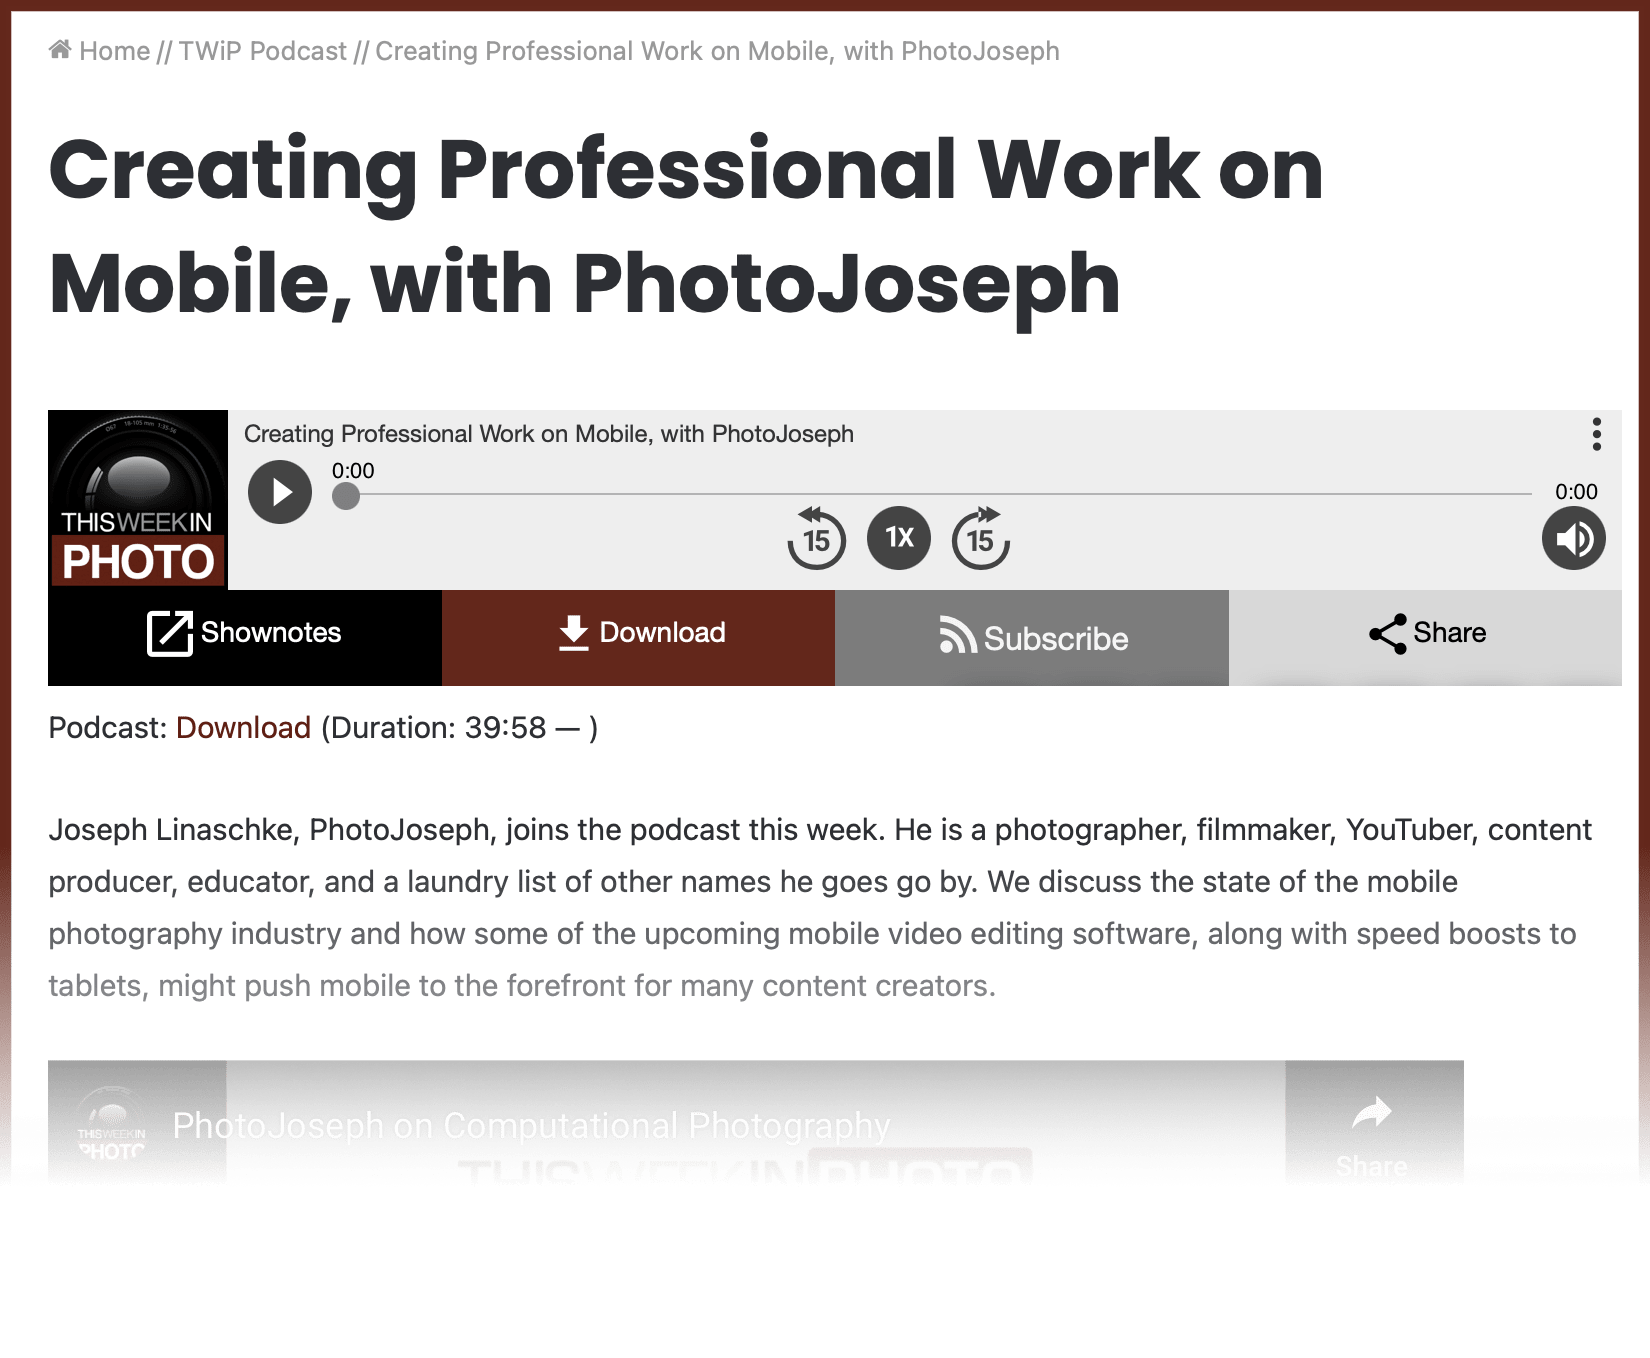 I was once again a guest on Frederick Van Johnson's "This Week in Photo" podcast, where we talked about mobile photo and video editing, and the future of AI in image making!